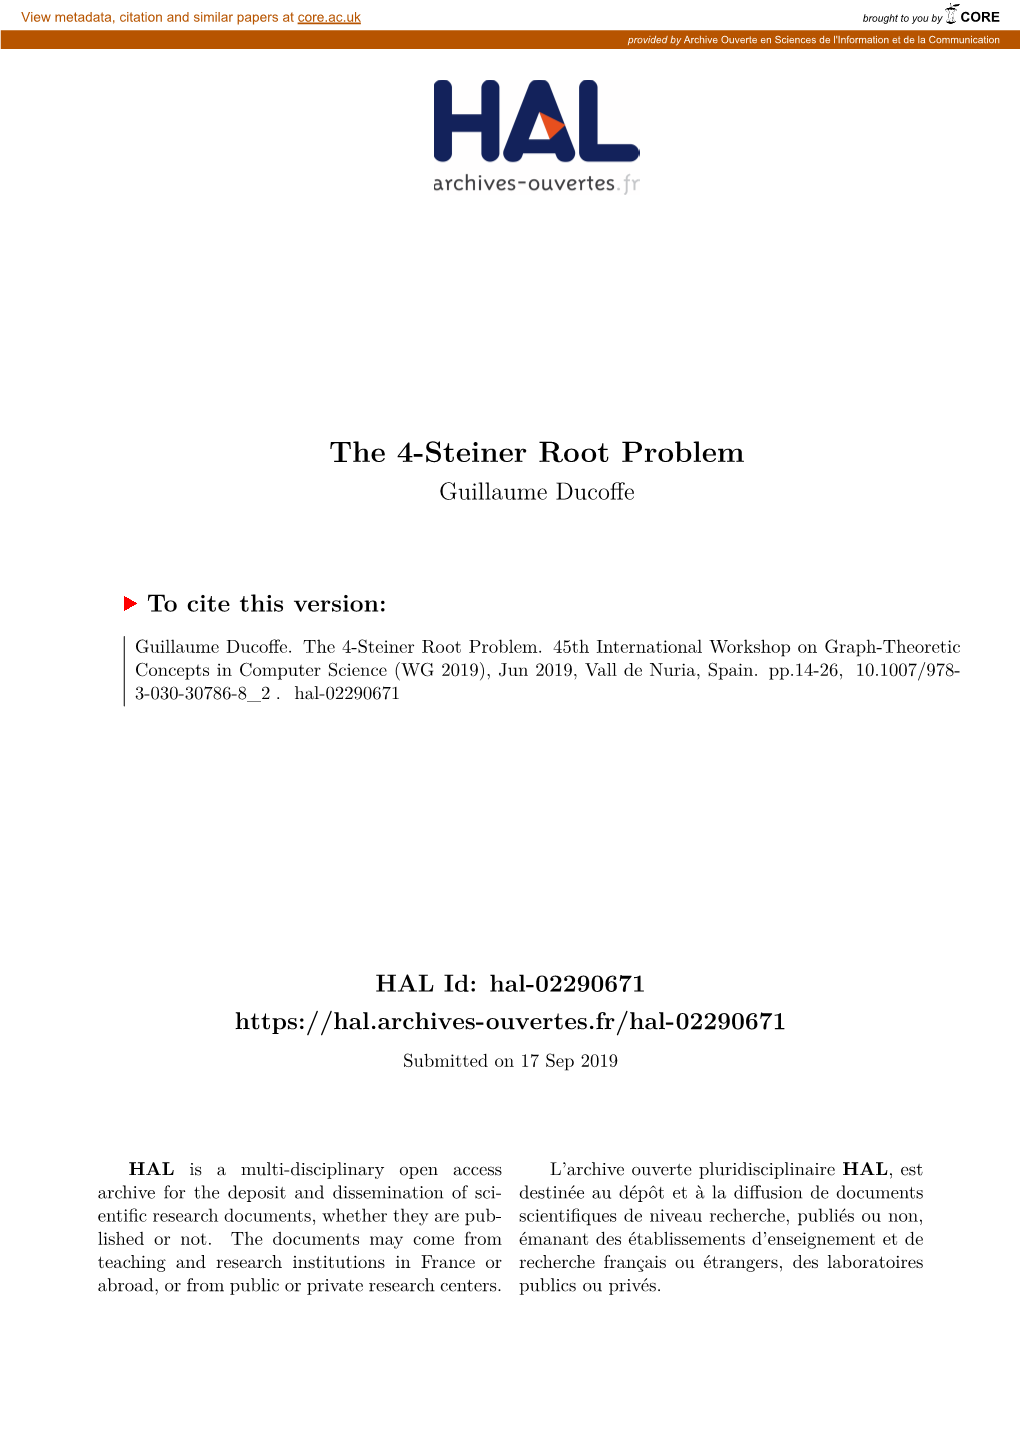 The 4-Steiner Root Problem Guillaume Ducoffe